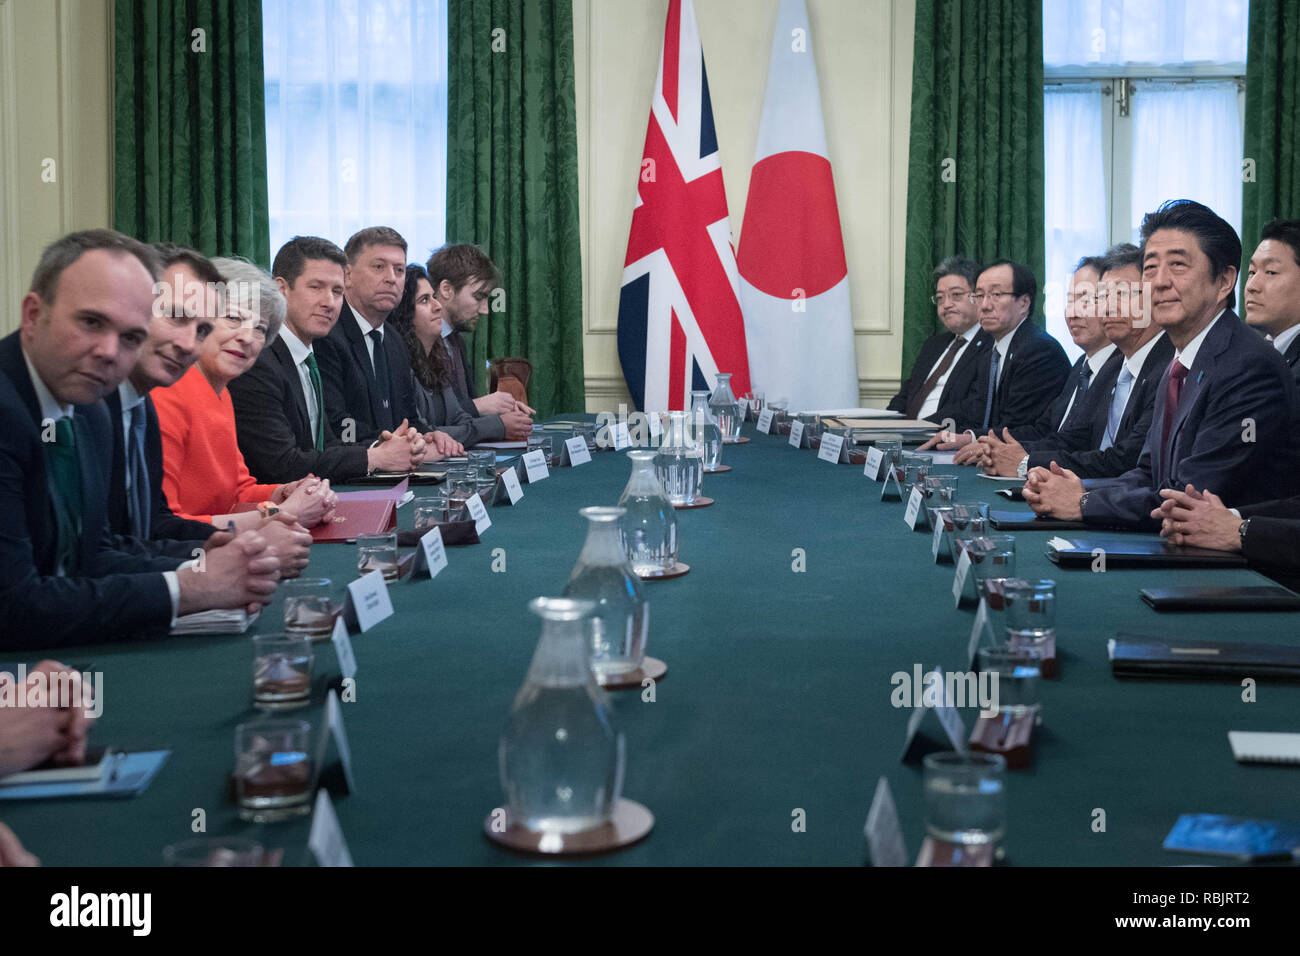 Prime Minister Theresa May with Japanese Prime Minister Shinzo Abe in 10 Downing Street, London ahead of a bilateral meeting. Stock Photo